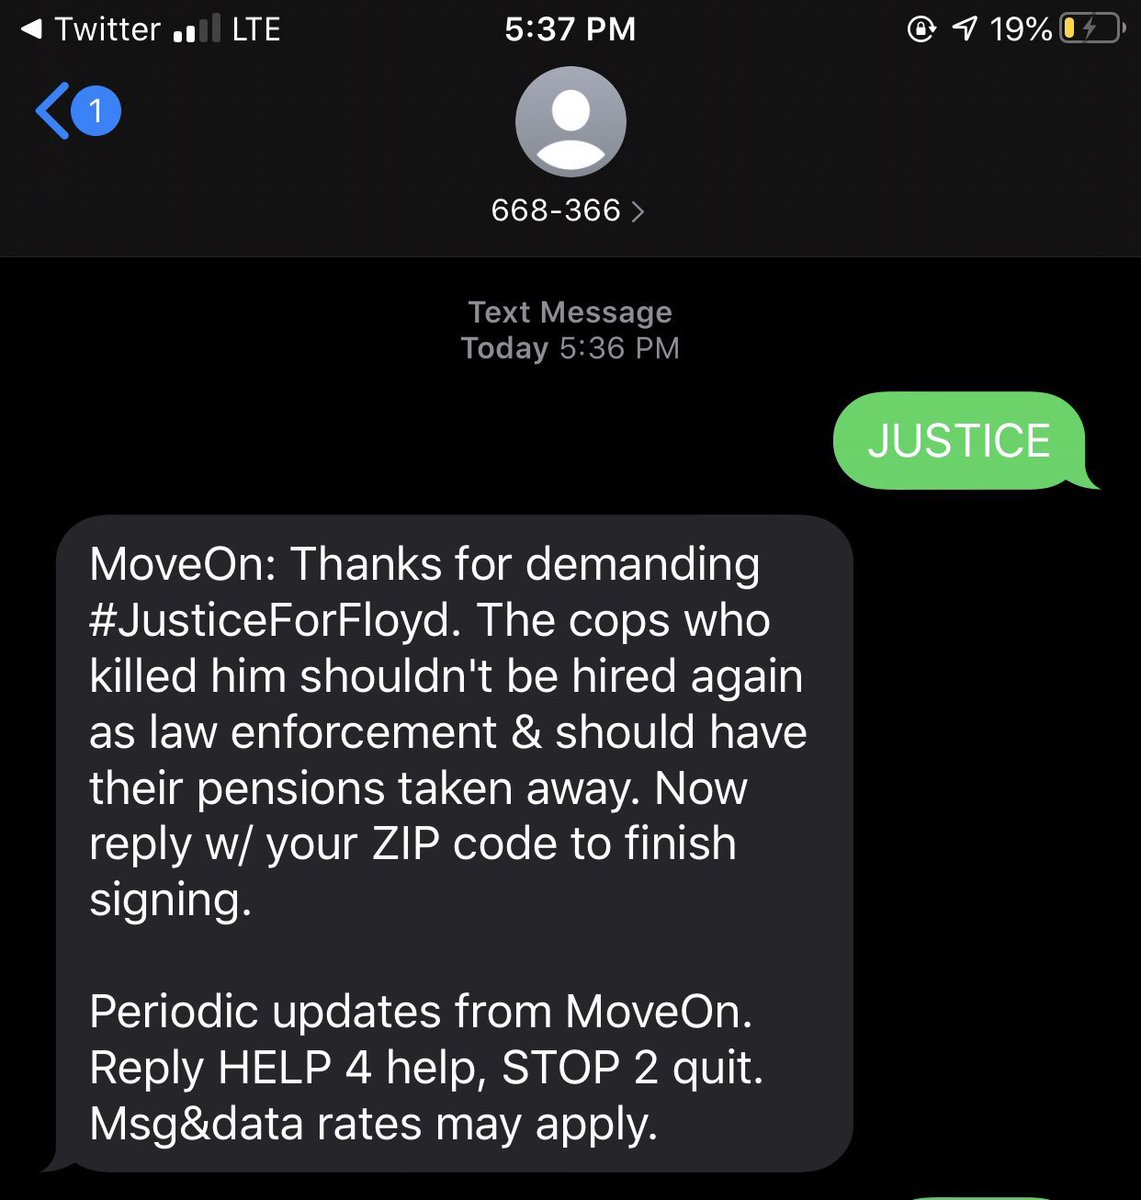 if you are from the US you can also text “JUSTICE” to 668-366. (not my screenshots, im not from the US)